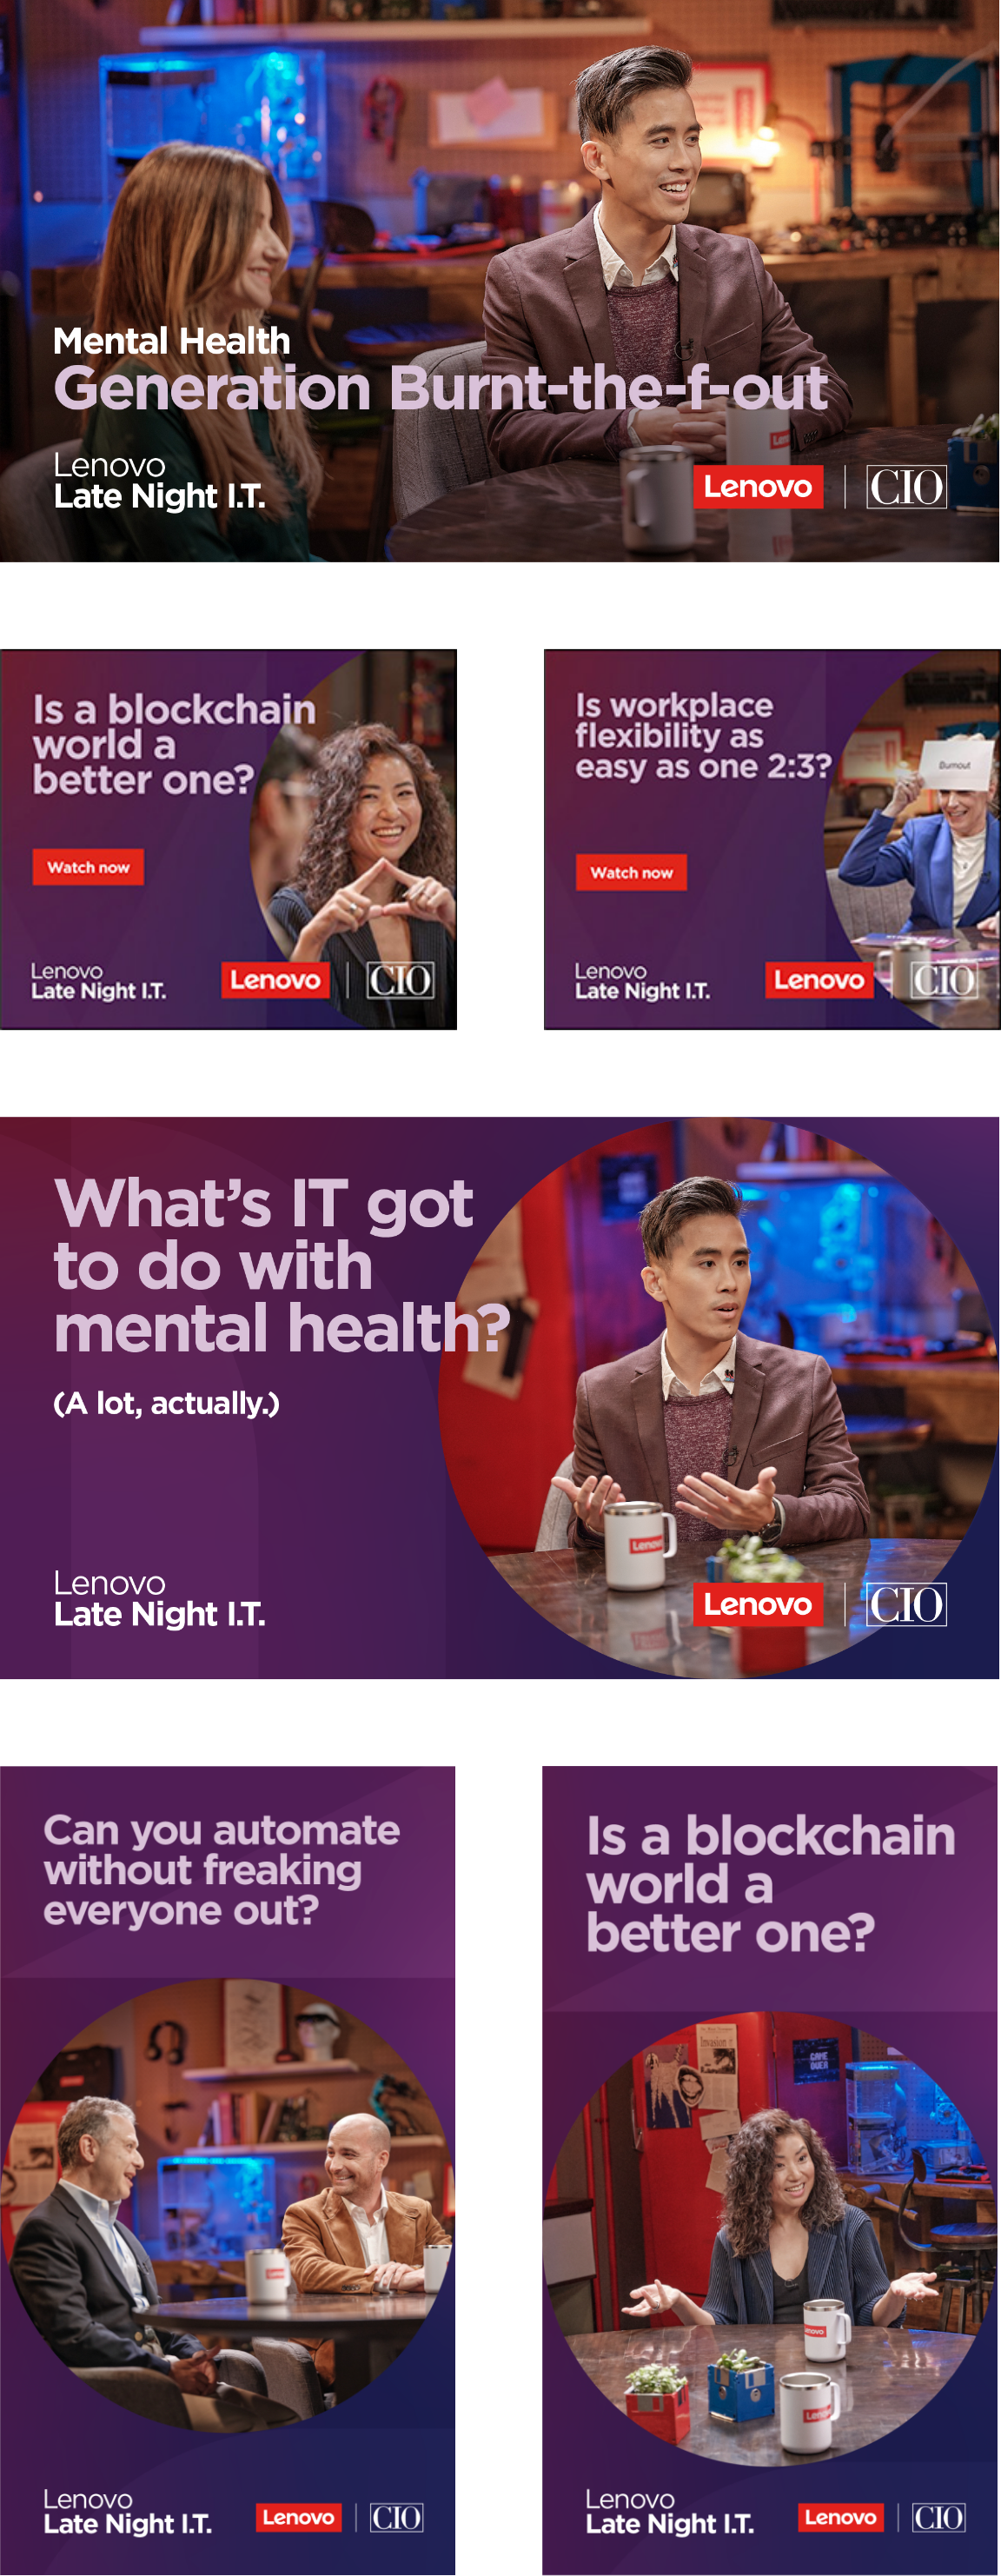 Collage 1 of Lenovo Late Night I.T. episode ads.